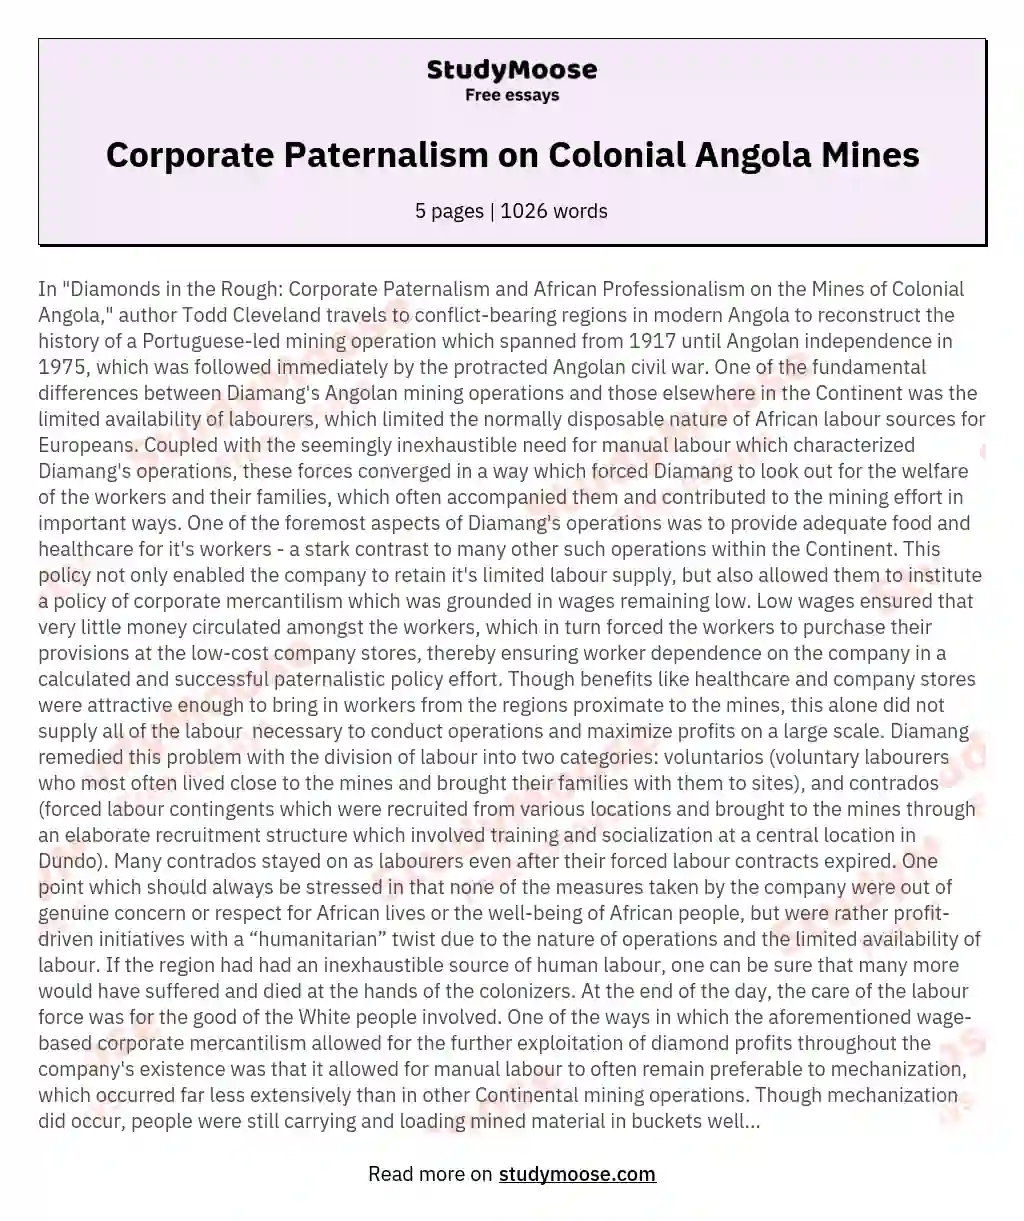 Corporate Paternalism on Colonial Angola Mines essay